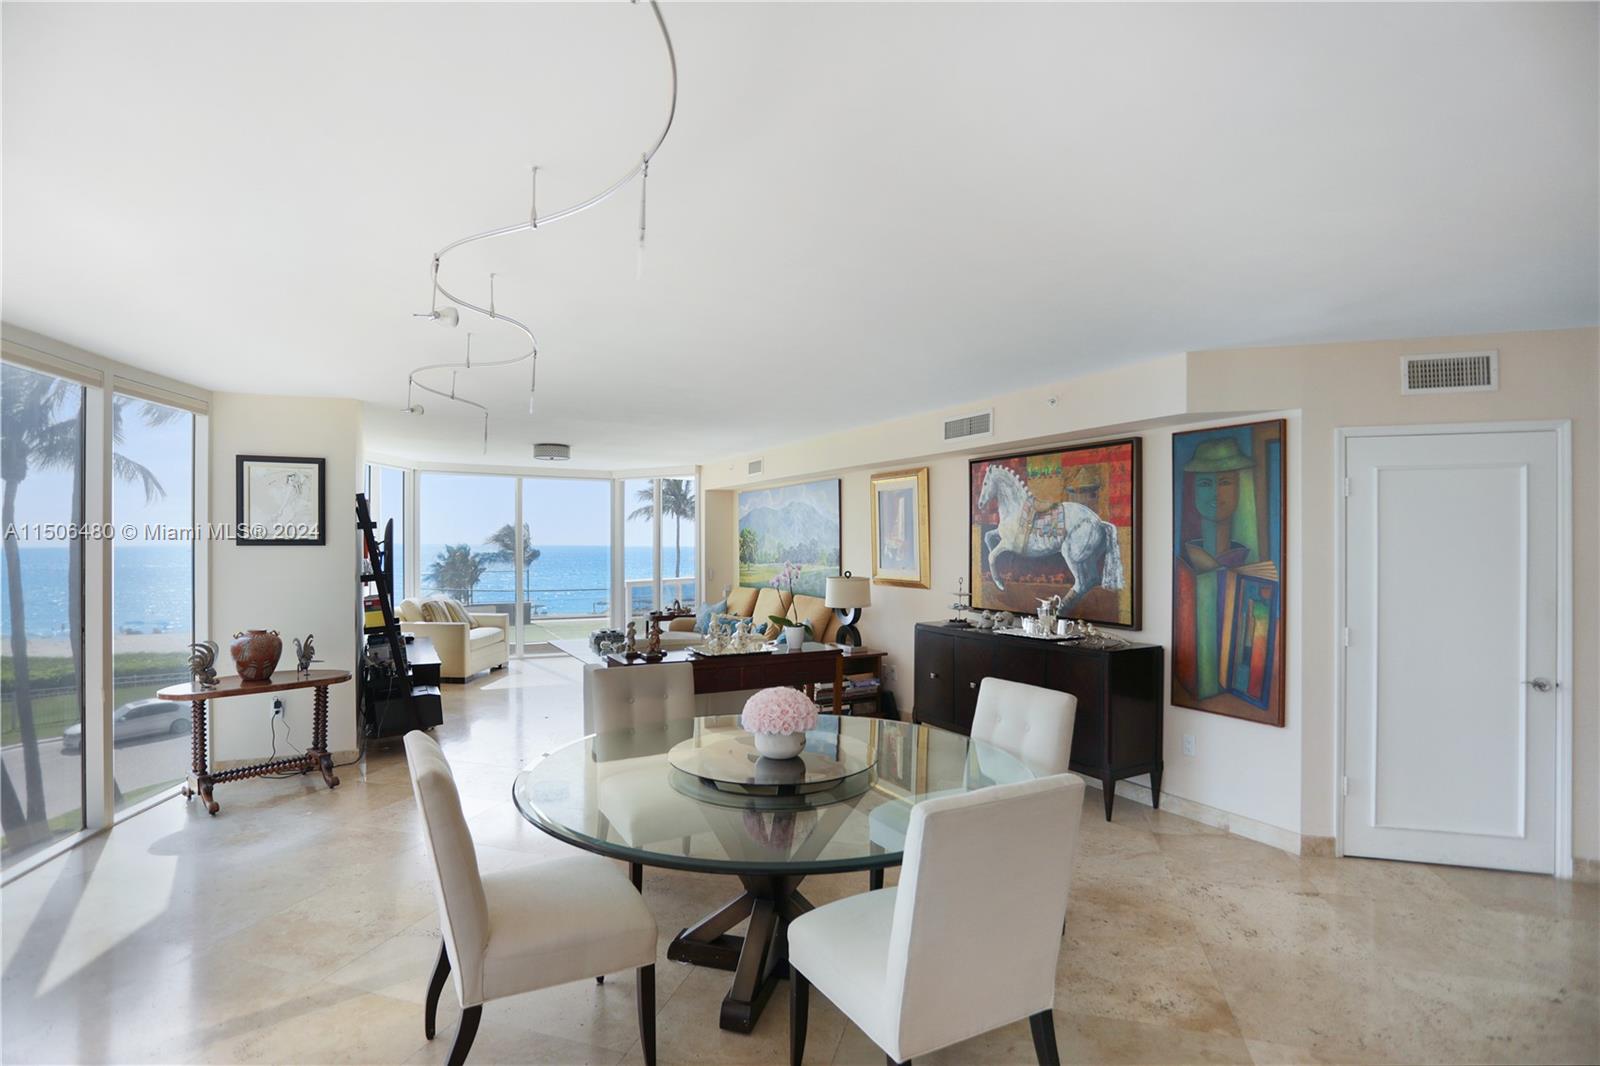 UPDATED 2,274 ft2, 3-bed, 3-bath corner unit at Pinnacle Condo with amazing ocean views, marble & wood floors. Ocean-view master bath, dual sinks, separate toilet & bidet, large shower, hot tub, walk-in closet. Eat-in kitchen with ocean & city views. Large living/dining areas. Pet-friendly building on 4 acres of land with 400 feet on the Atlantic Ocean. 5-star services: 24/7 front desk, package receiving, pool/beach service, valet parking. Amenities incl. a kids’ room, billiards room, ping pong, tennis court, heated pool & spa, fully-equipped fitness center, men's & women's spas, saunas & steam rooms, massage room for couples’ massage, media/social room (ideal for private events), cigar room, meeting rooms, residents lounge, dog park & more. Optional Beach Cabana & Parking Space available.